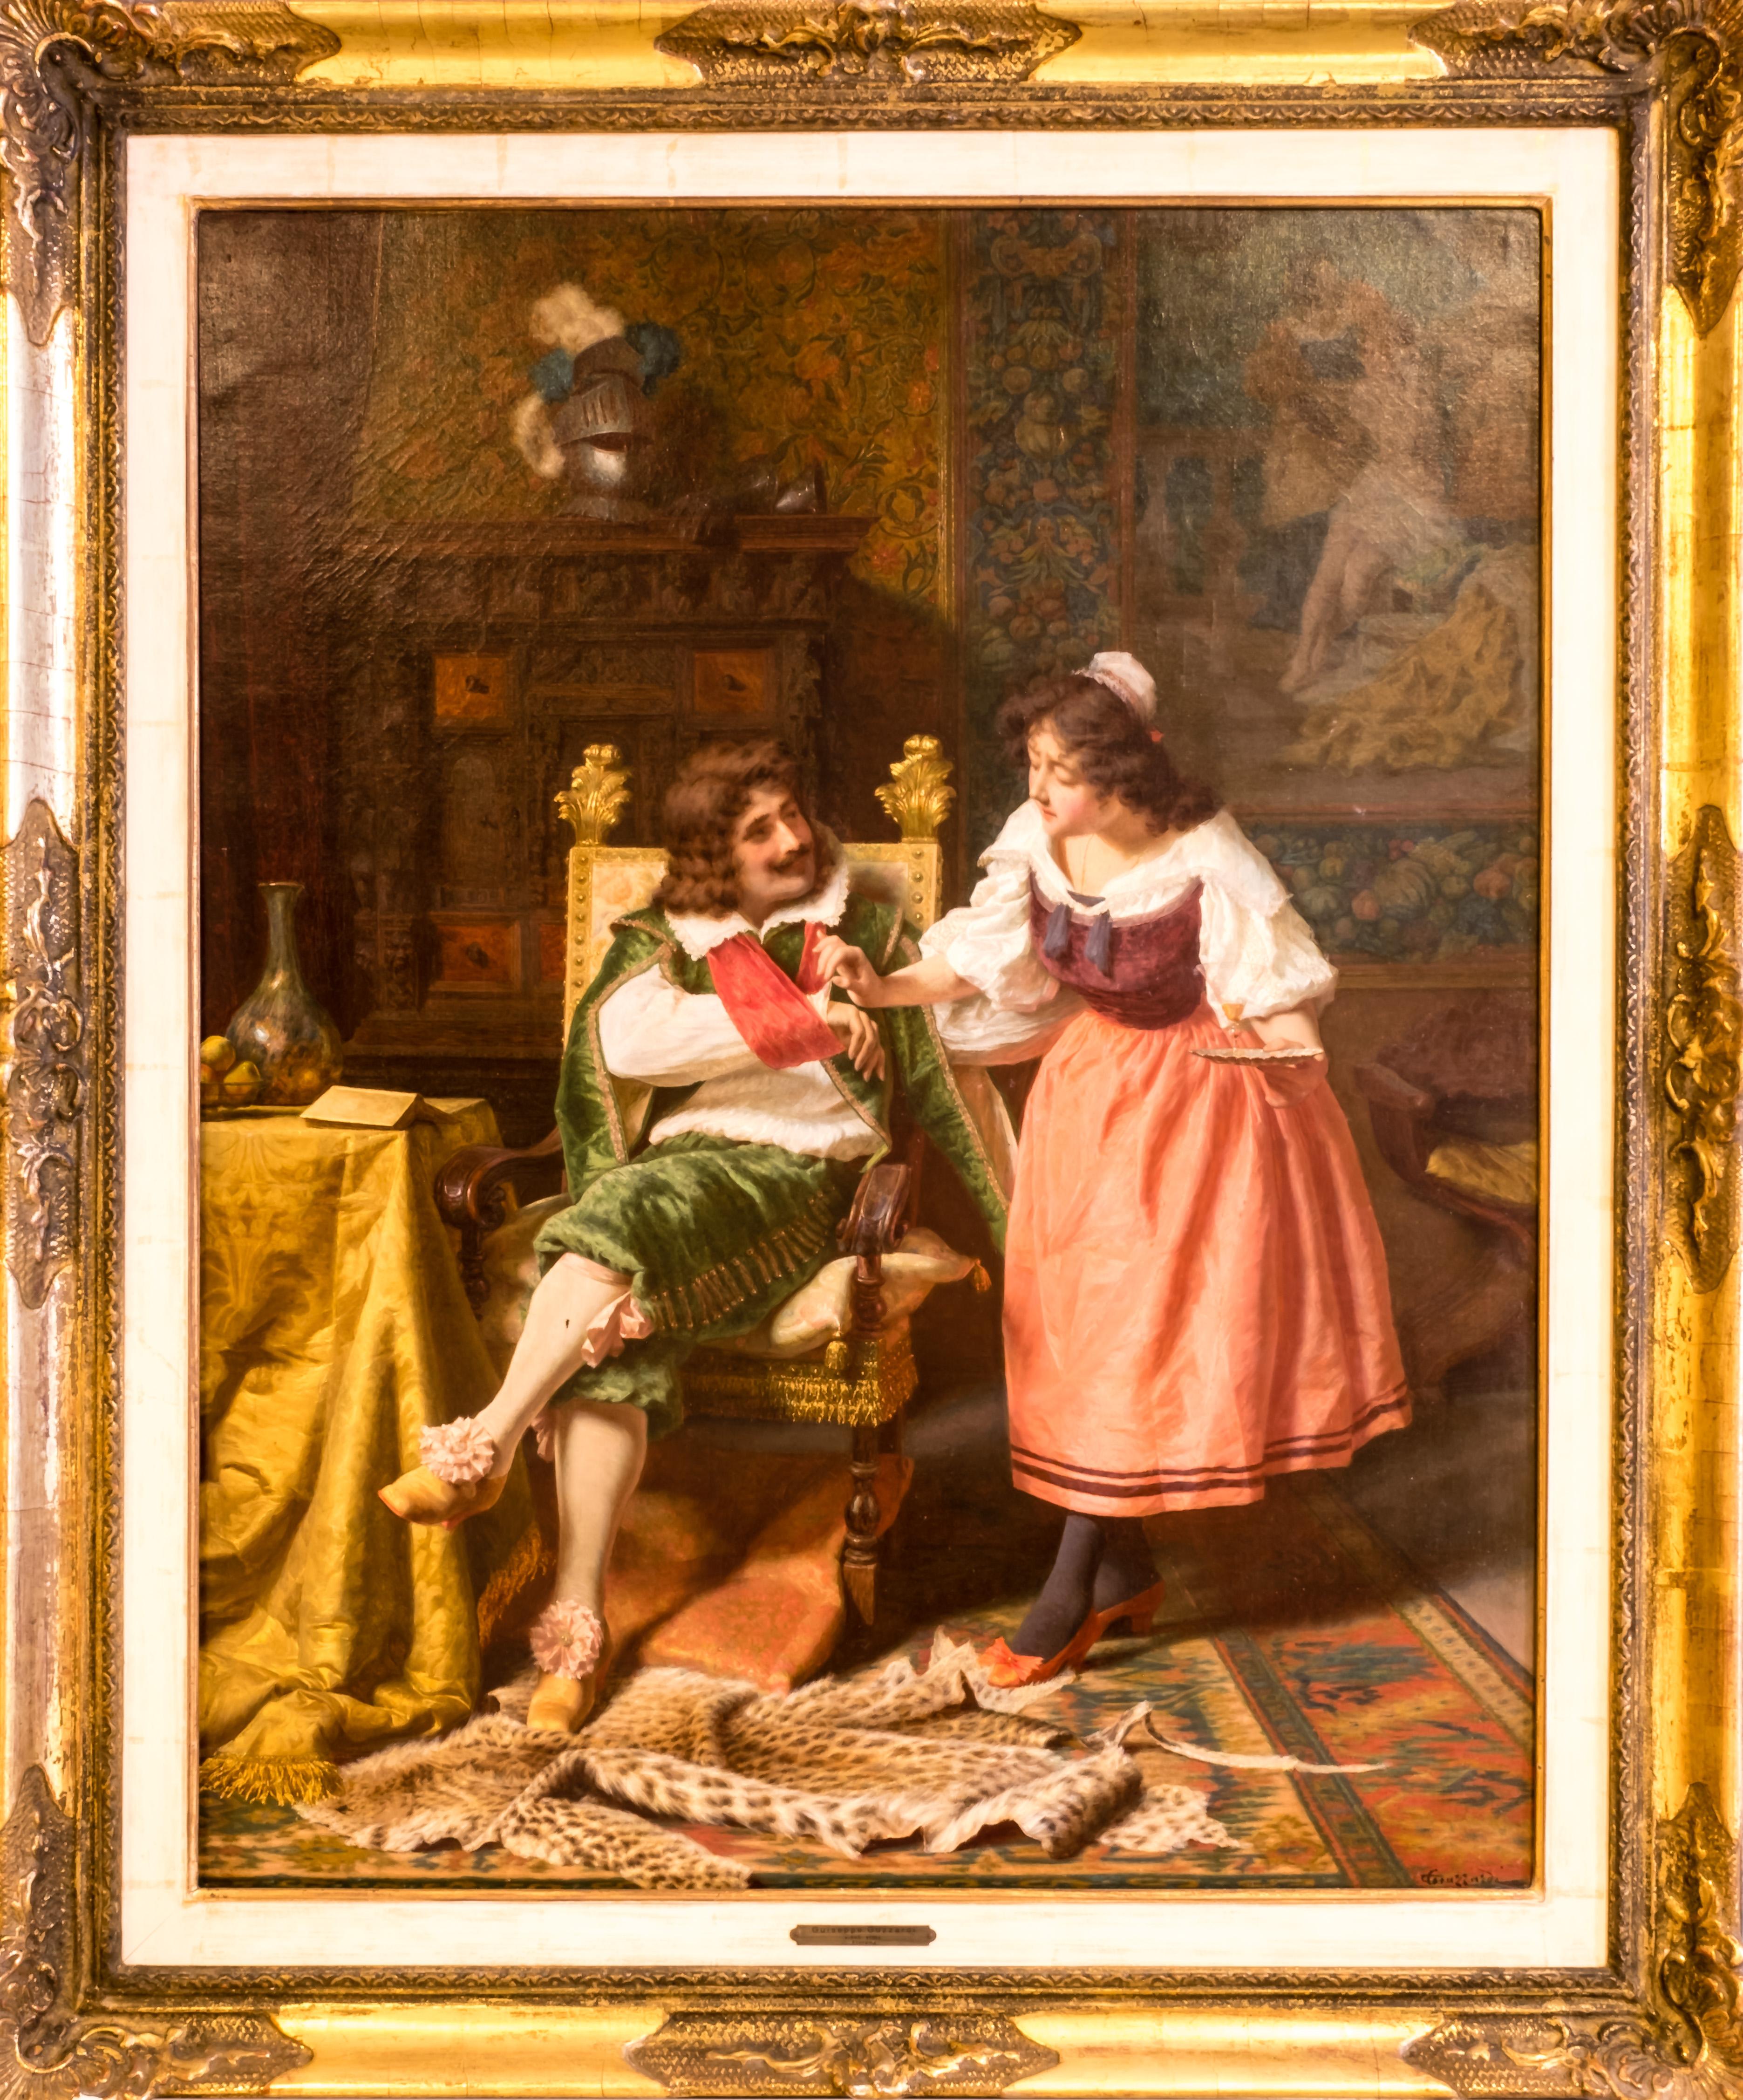 A 19th century genre painting by the colorful scene is set in a reading room, where the elegantly dressed nobleman, who recently fought in a battle (reference to the helmet and armor in the background), suffered an injury to his arm. The nurse,